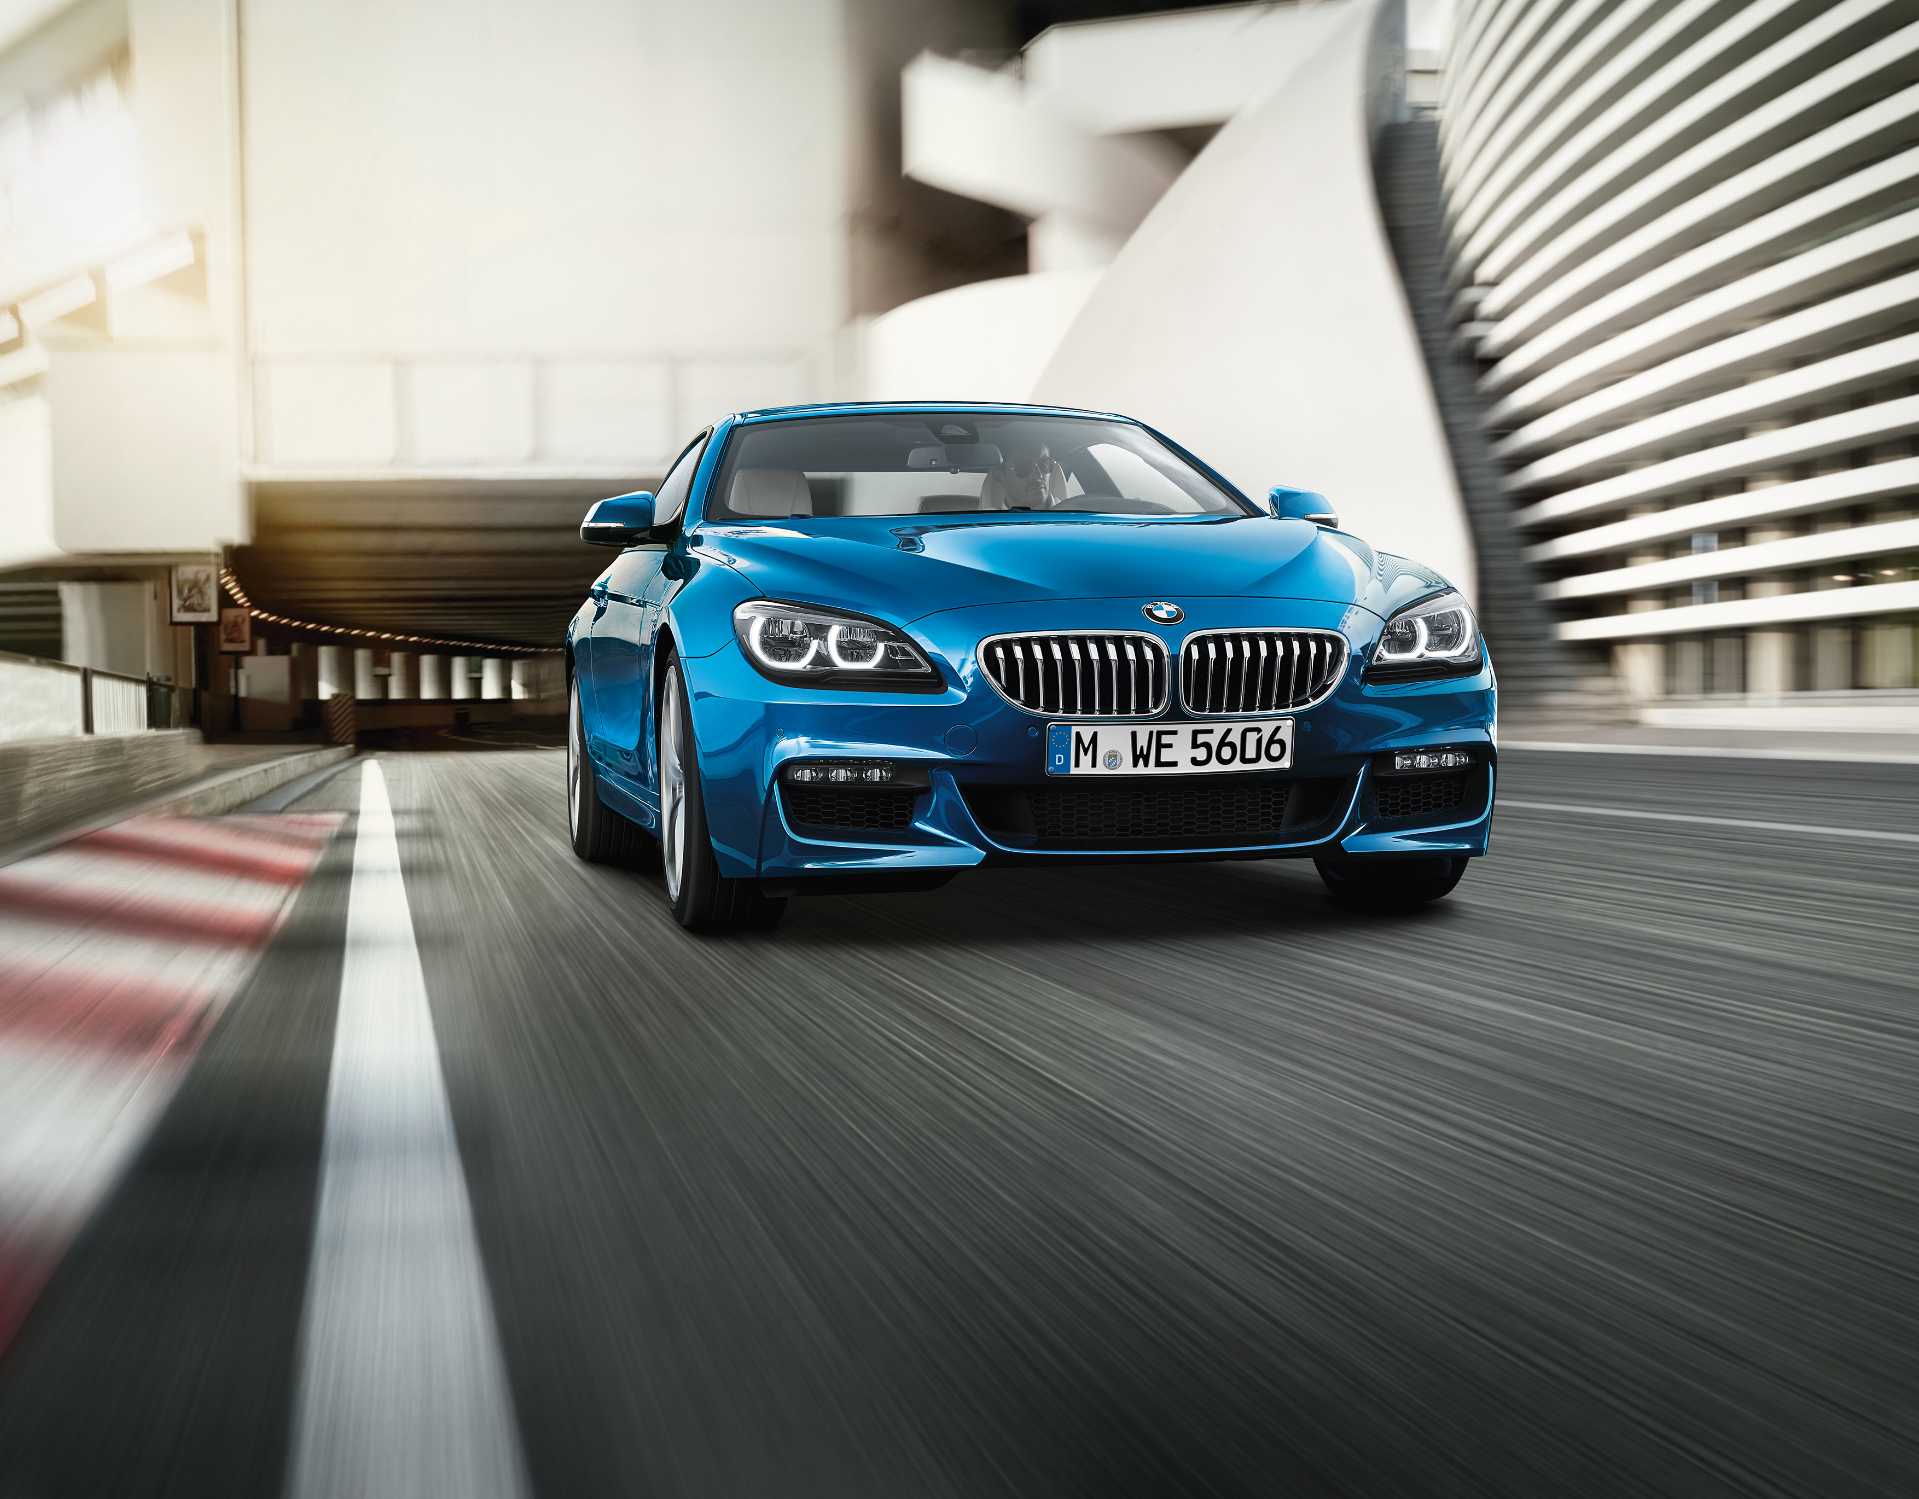 The Bmw 6 Series Luxurious Elegance At Its Best